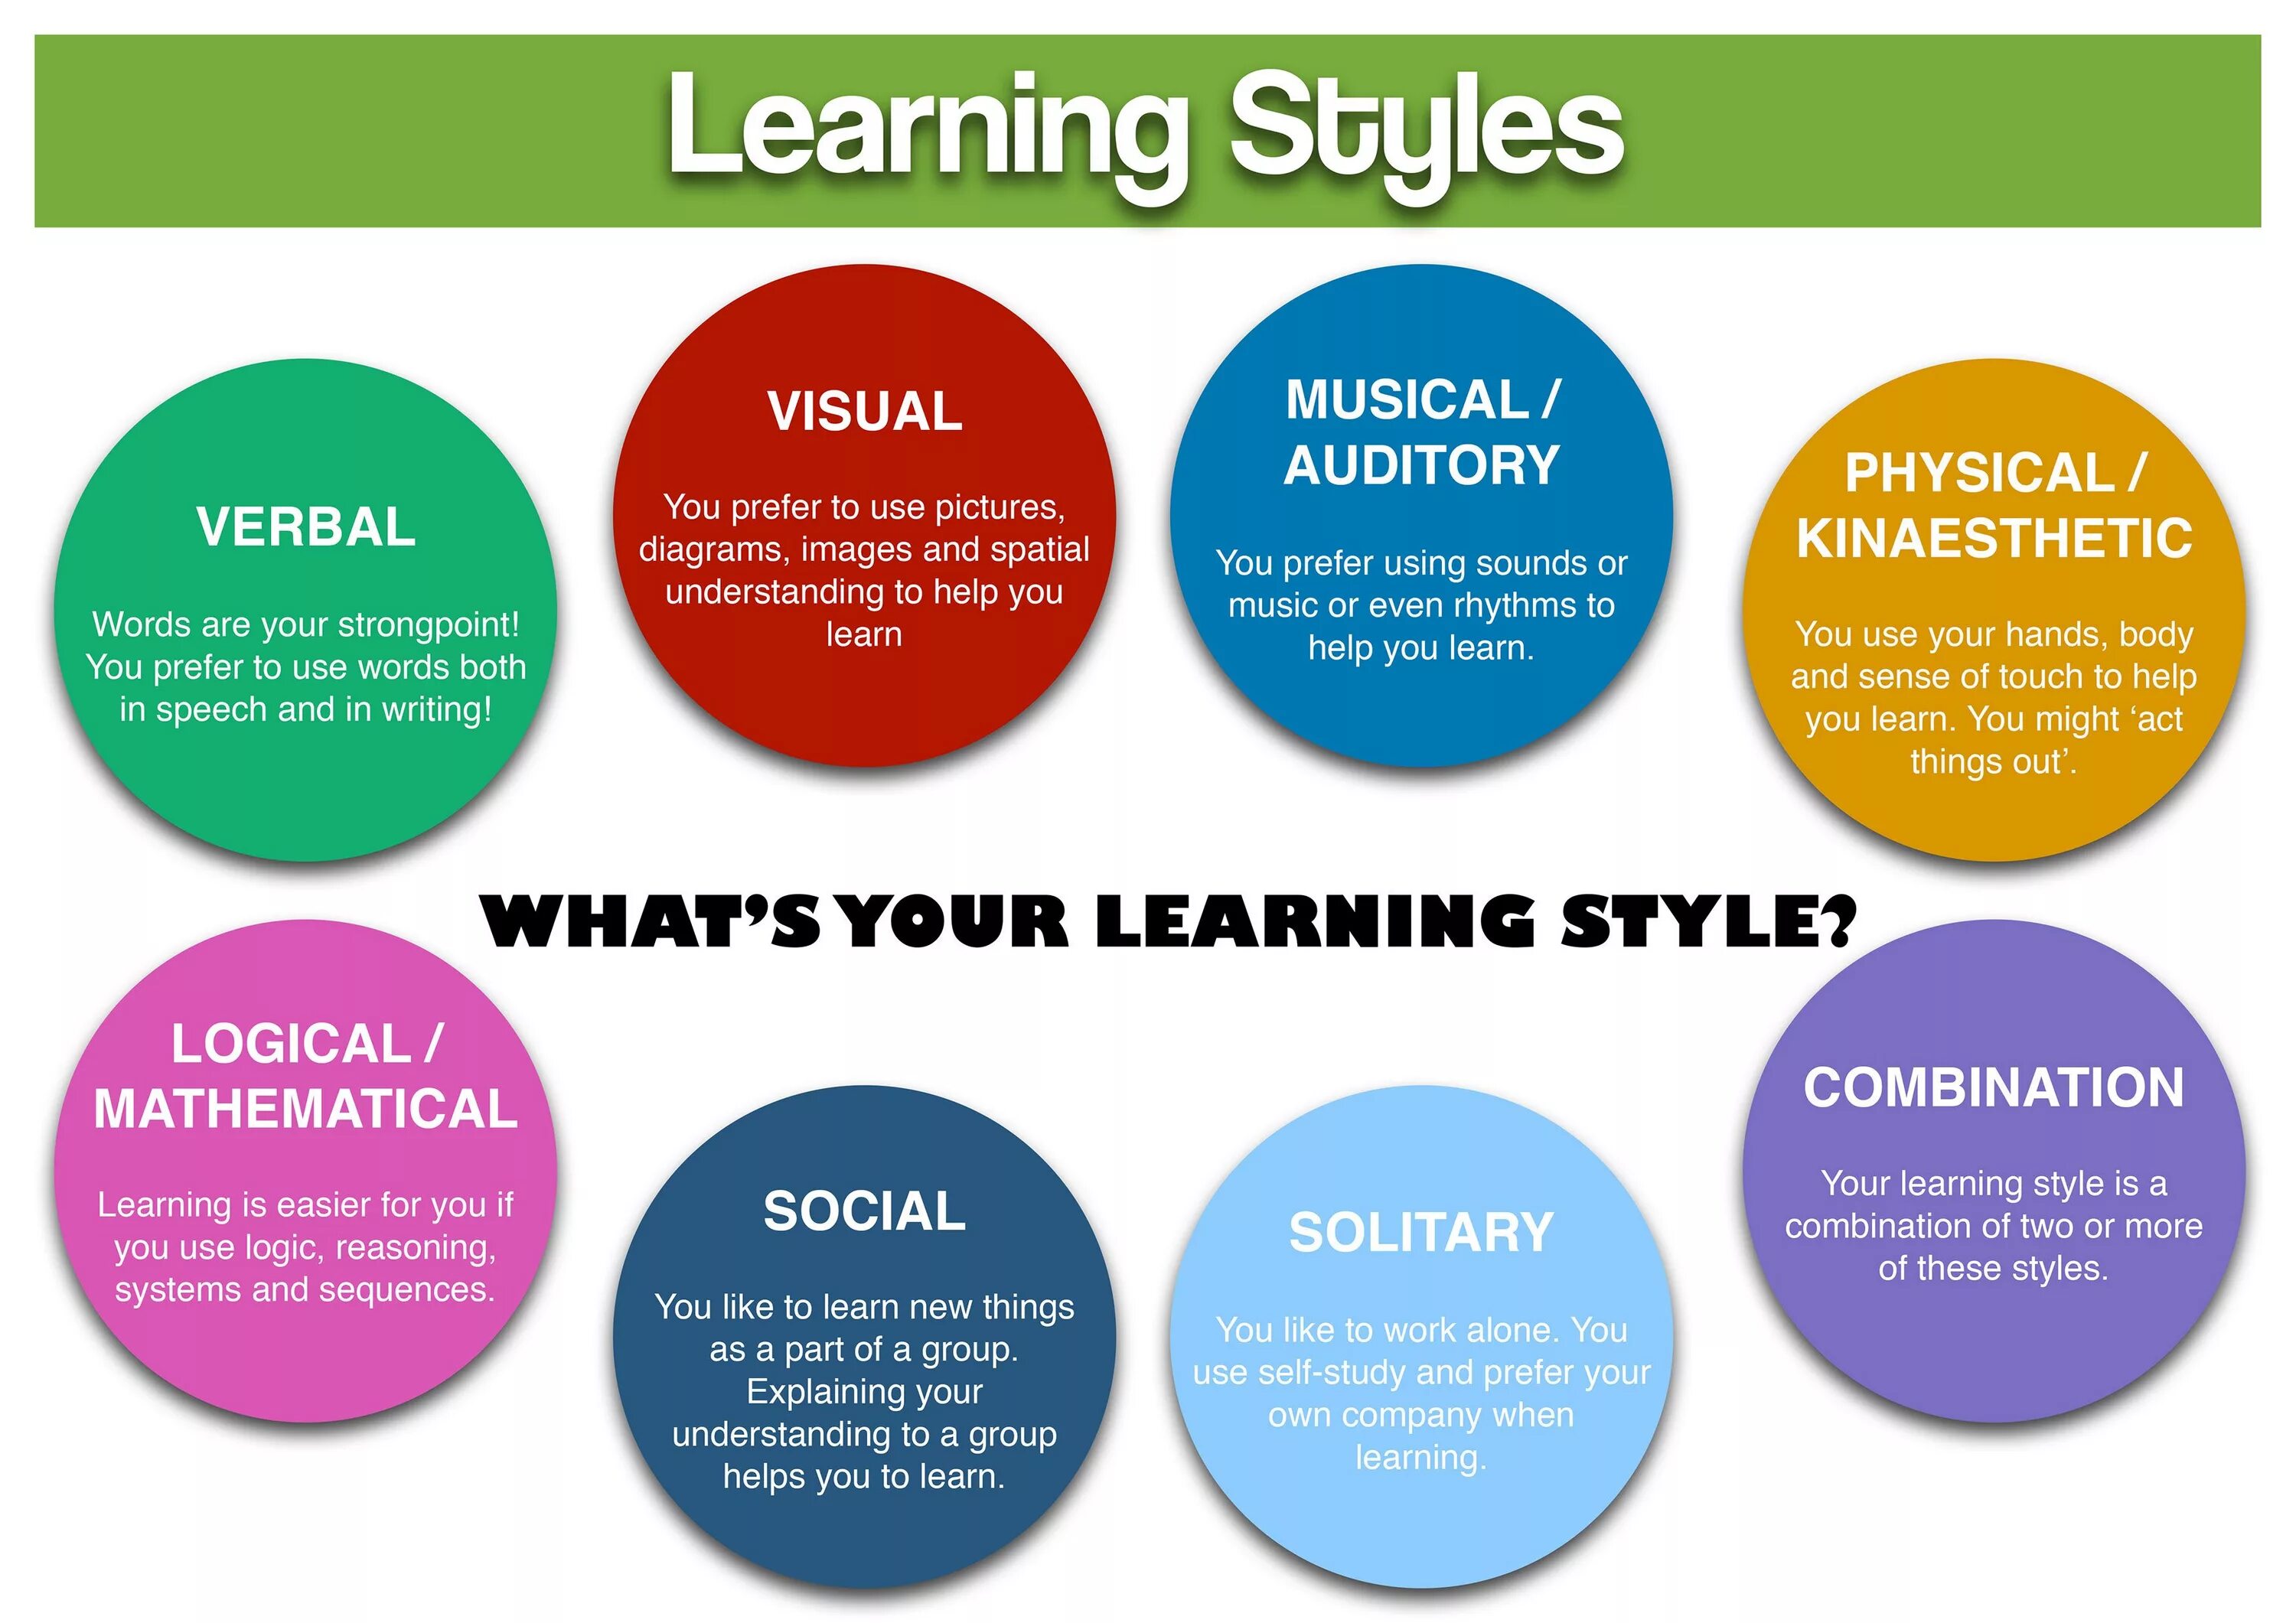 Learning Styles. Types of Learning Styles. Different Learning Styles. Learning Styles and Strategies.